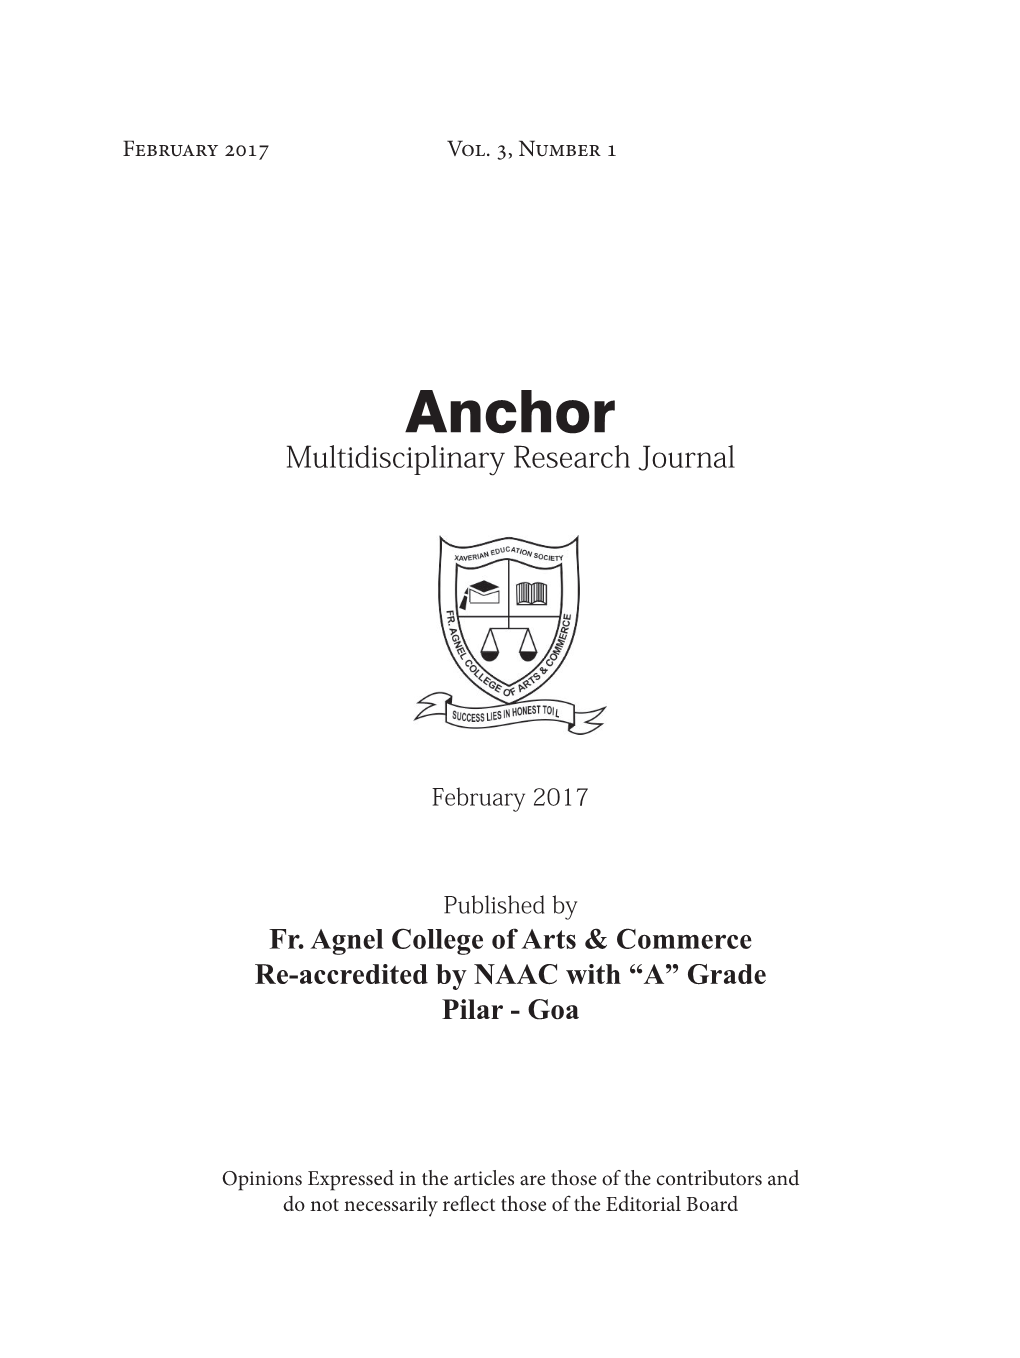 Anchor Multidisciplinary Research Journal